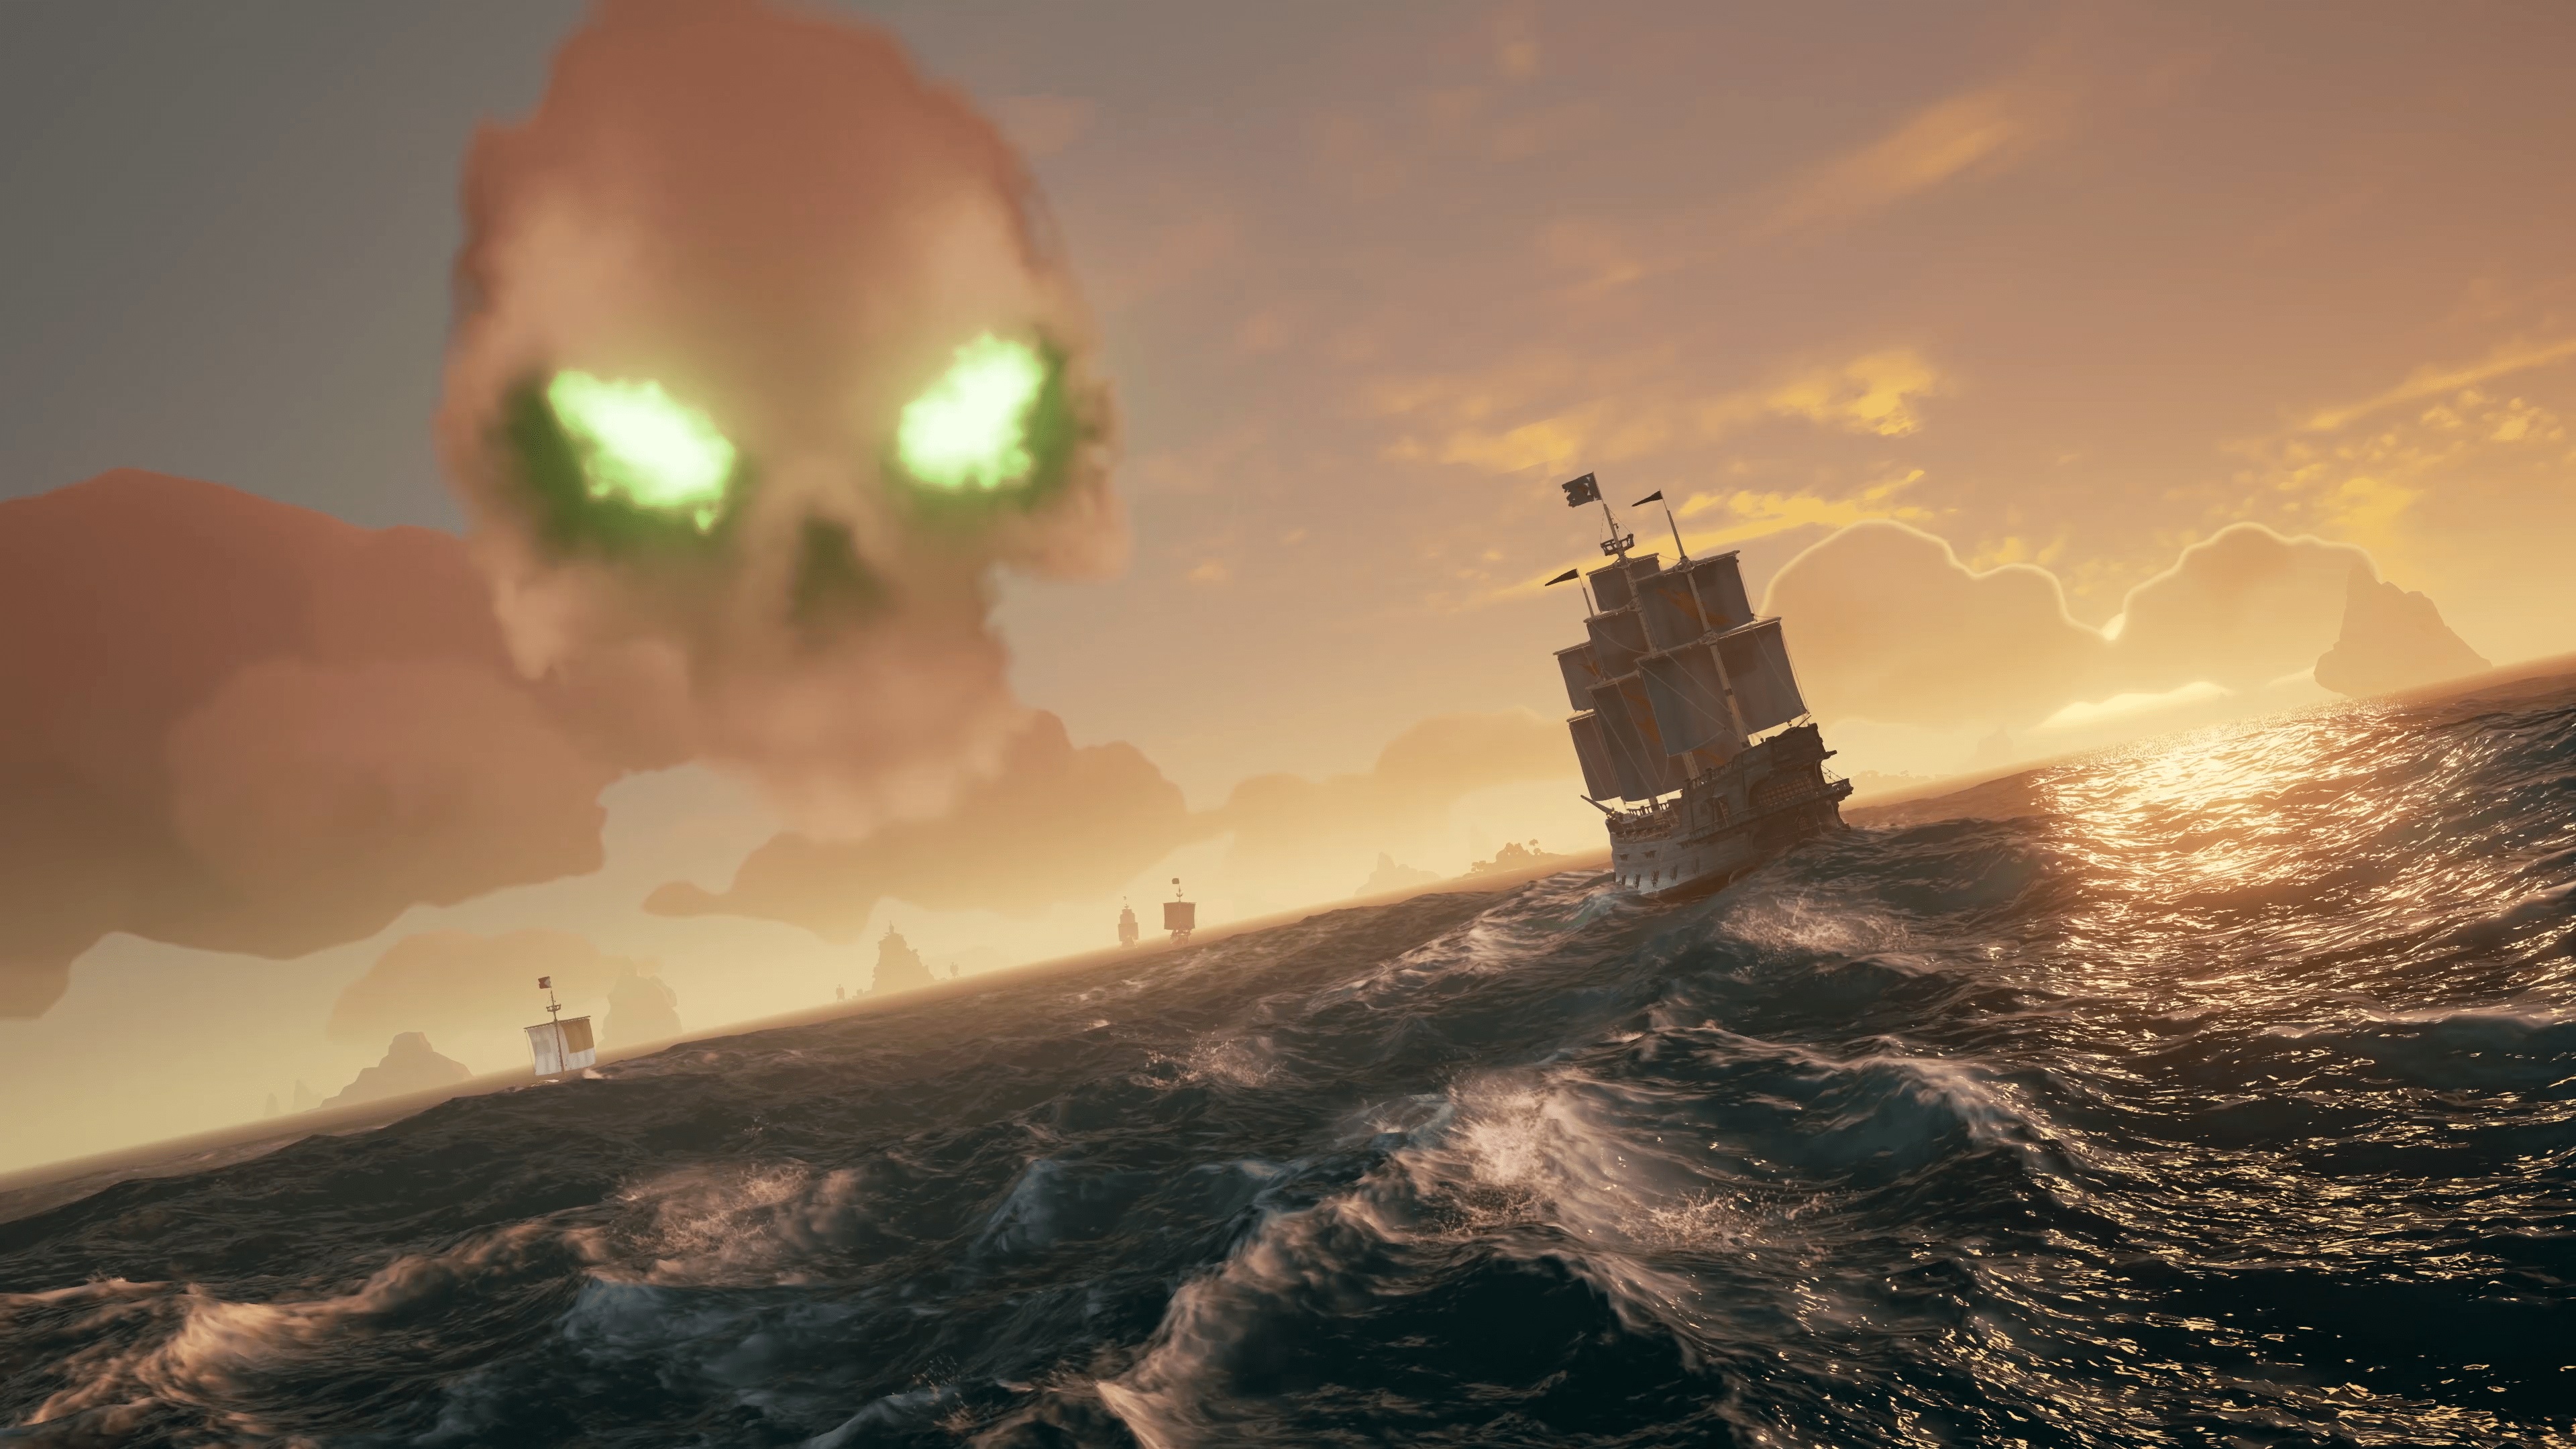 Sea of Thieves beginner’s guide: 16 tips for new pirates